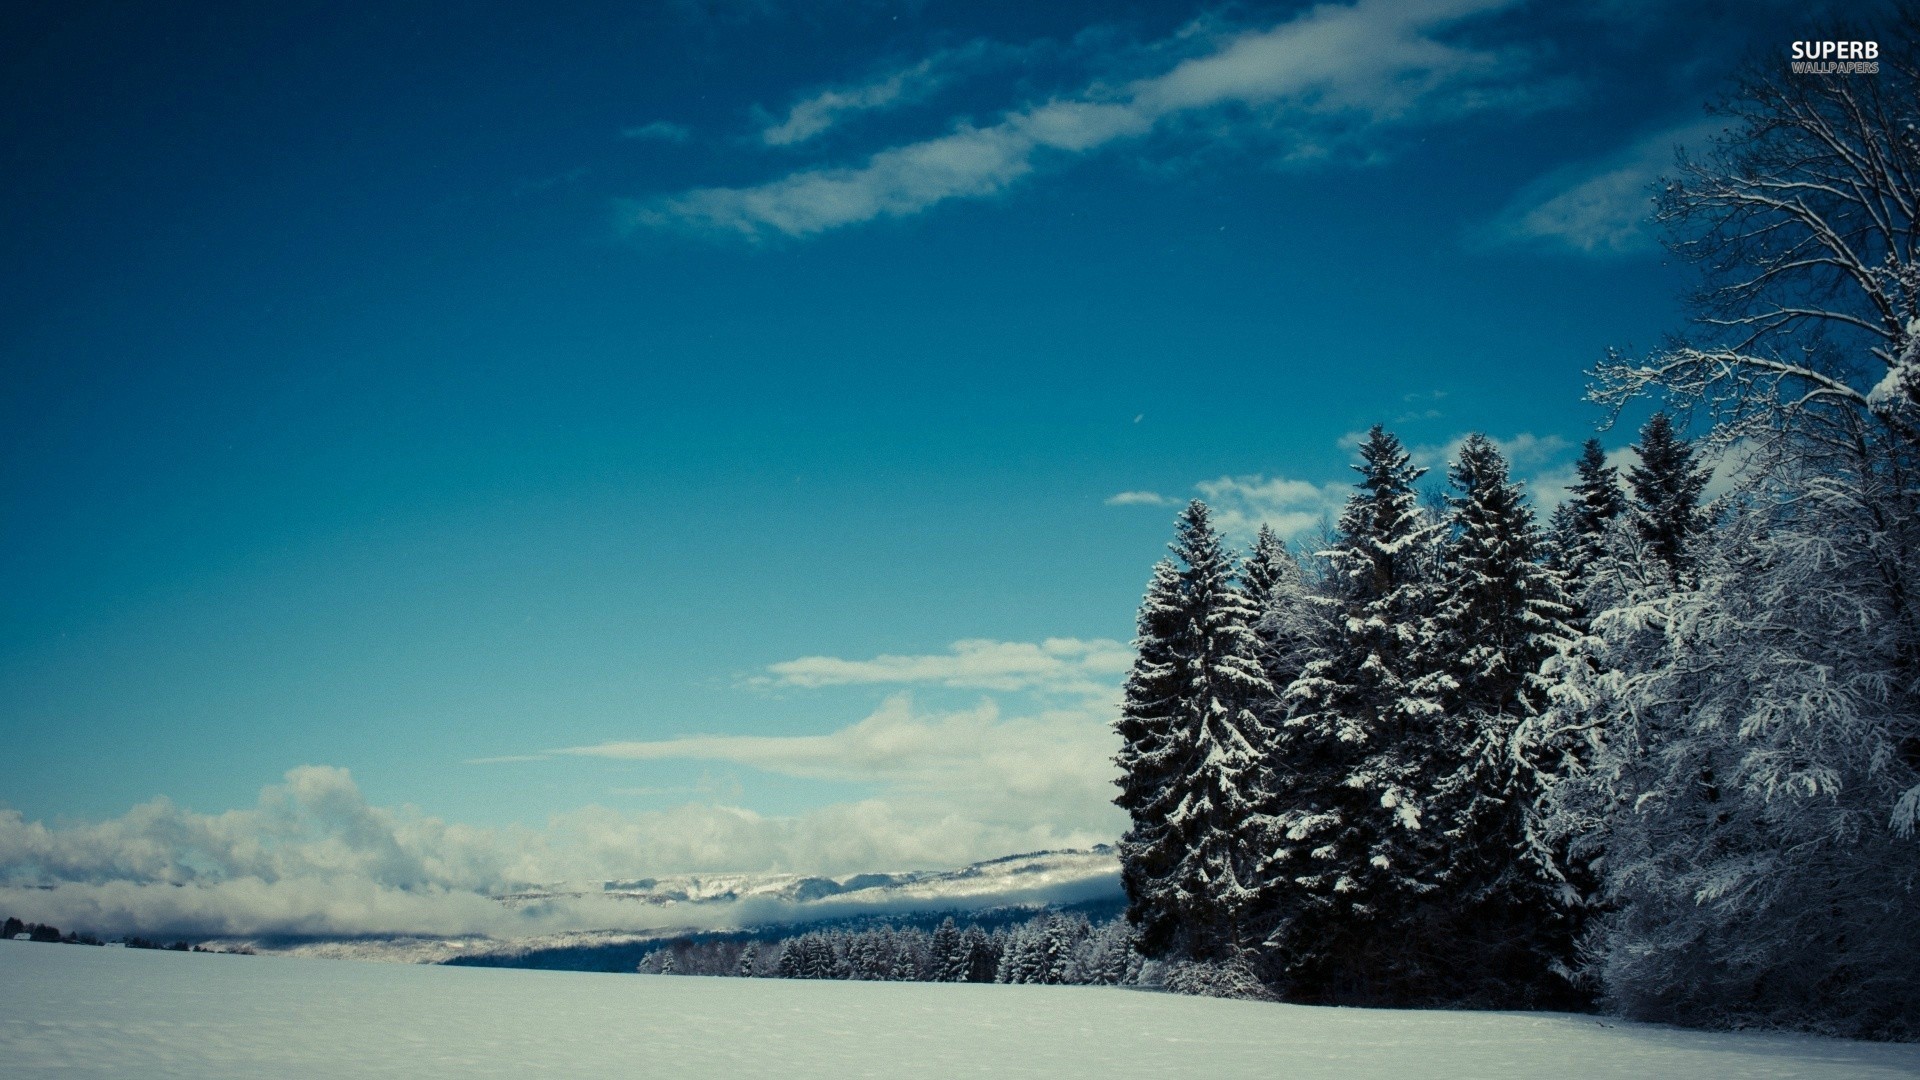 A snowy field with conifers